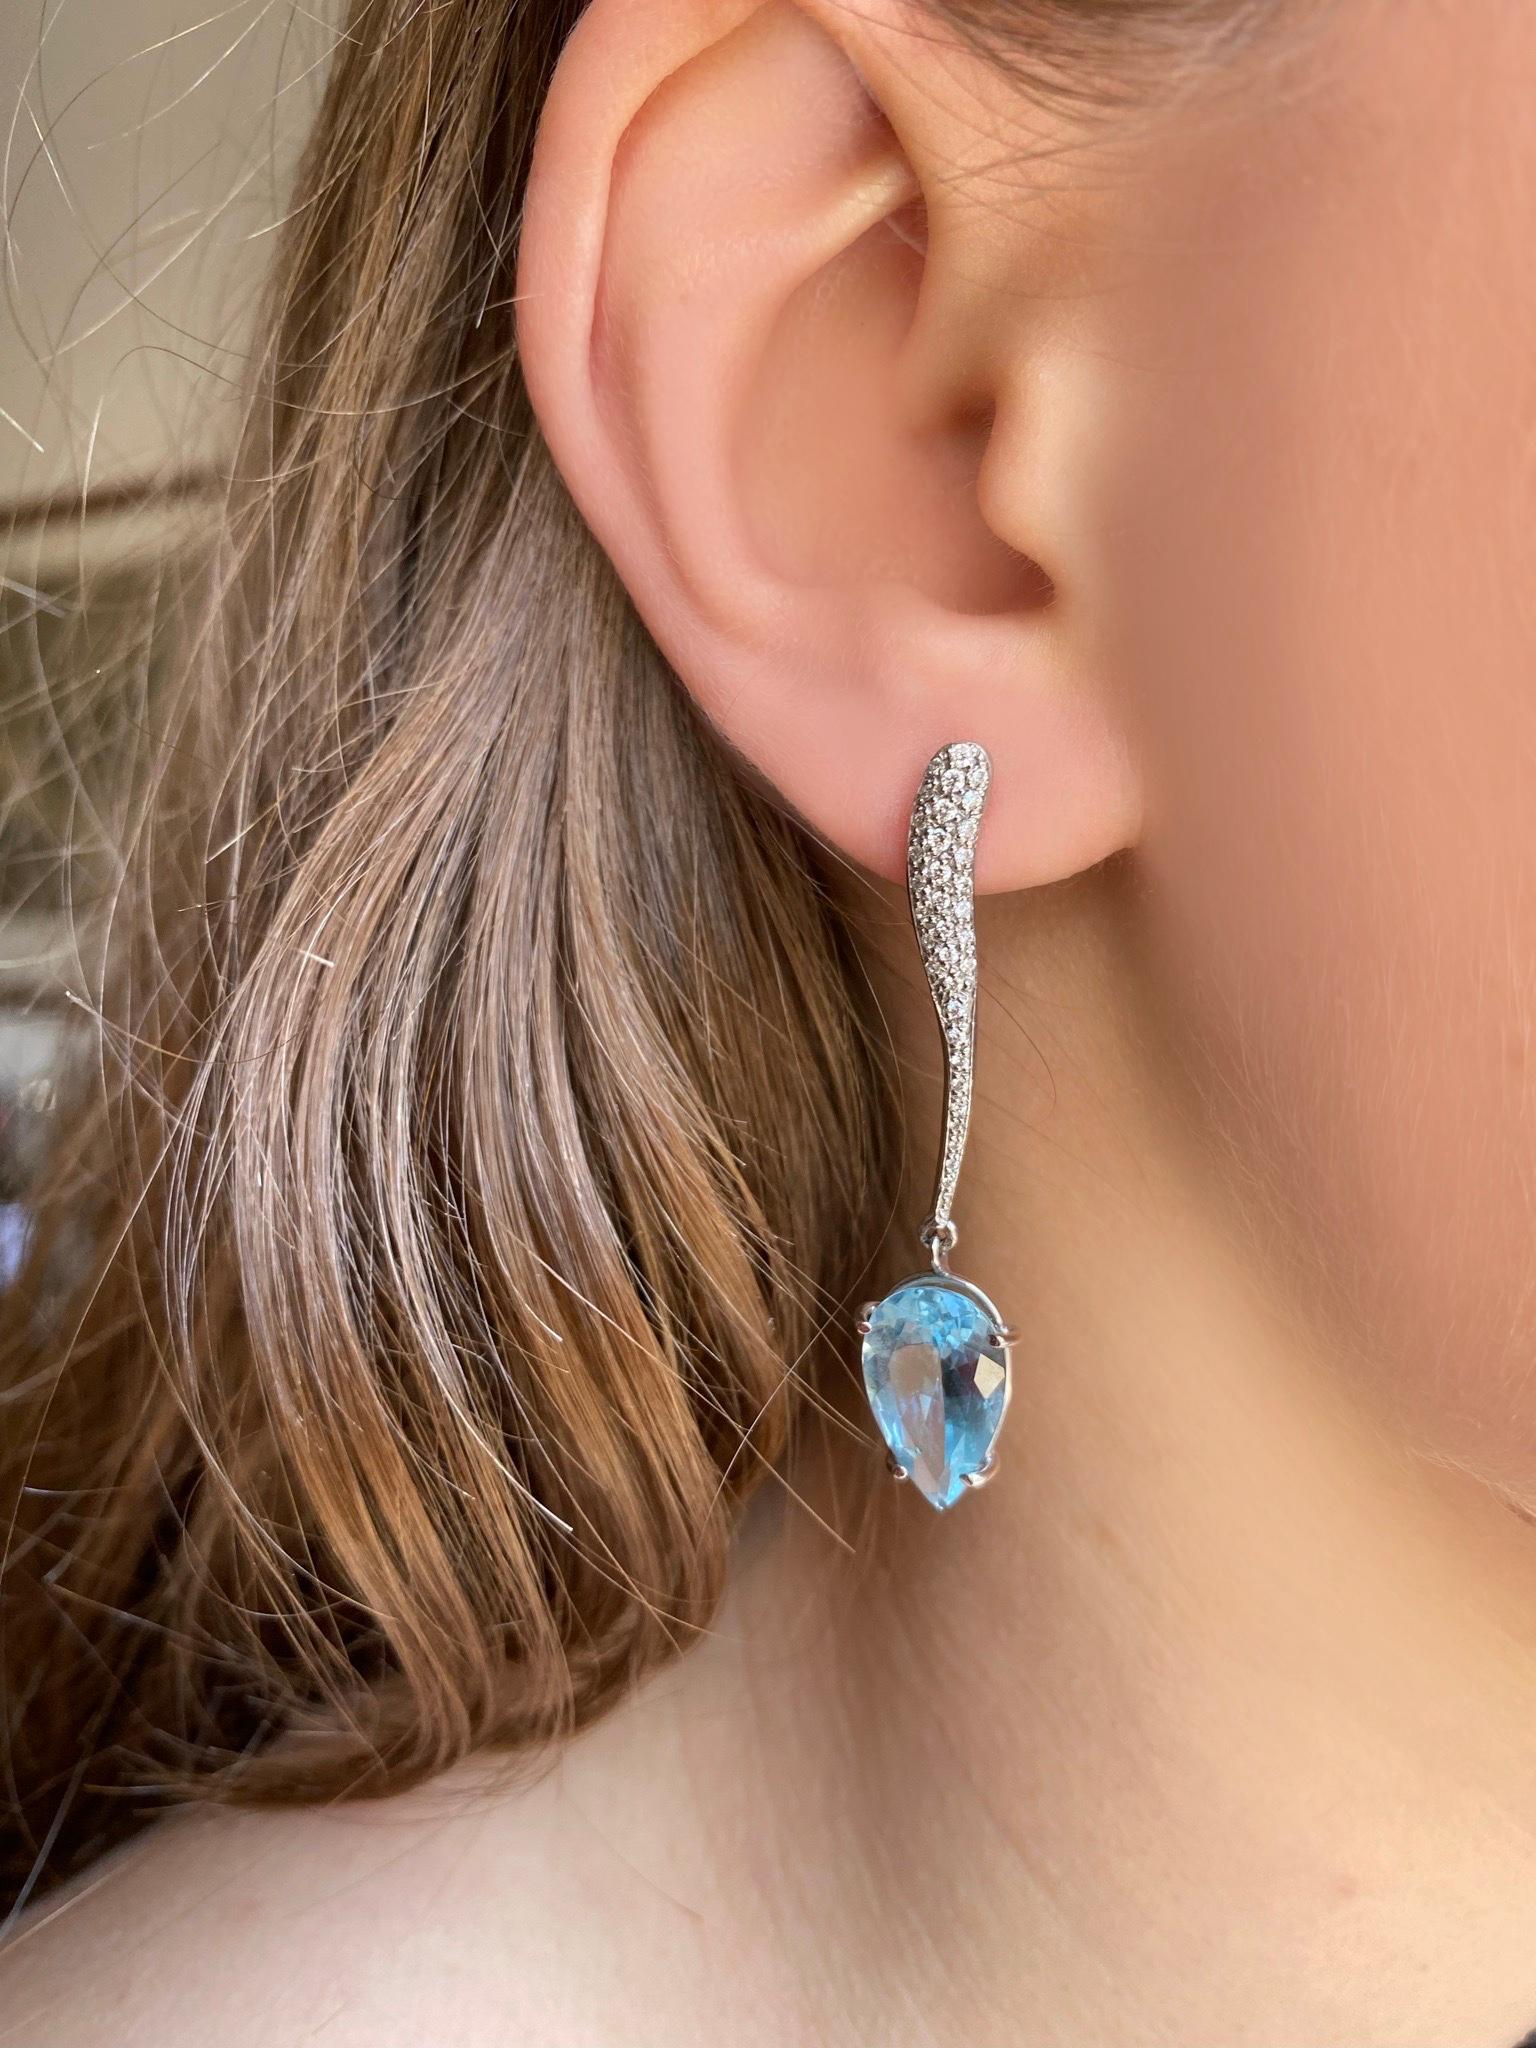 Rossella Ugolini Design Collection 6.88 karats Pear Shape Aquamarine 0.50 Karats Diamonds Elegant Design Earrings
This amazing pair of dangle earrings is handcrafted in 18 karat white gold and is embellished with a 6.88 karat pear shape aquamarine